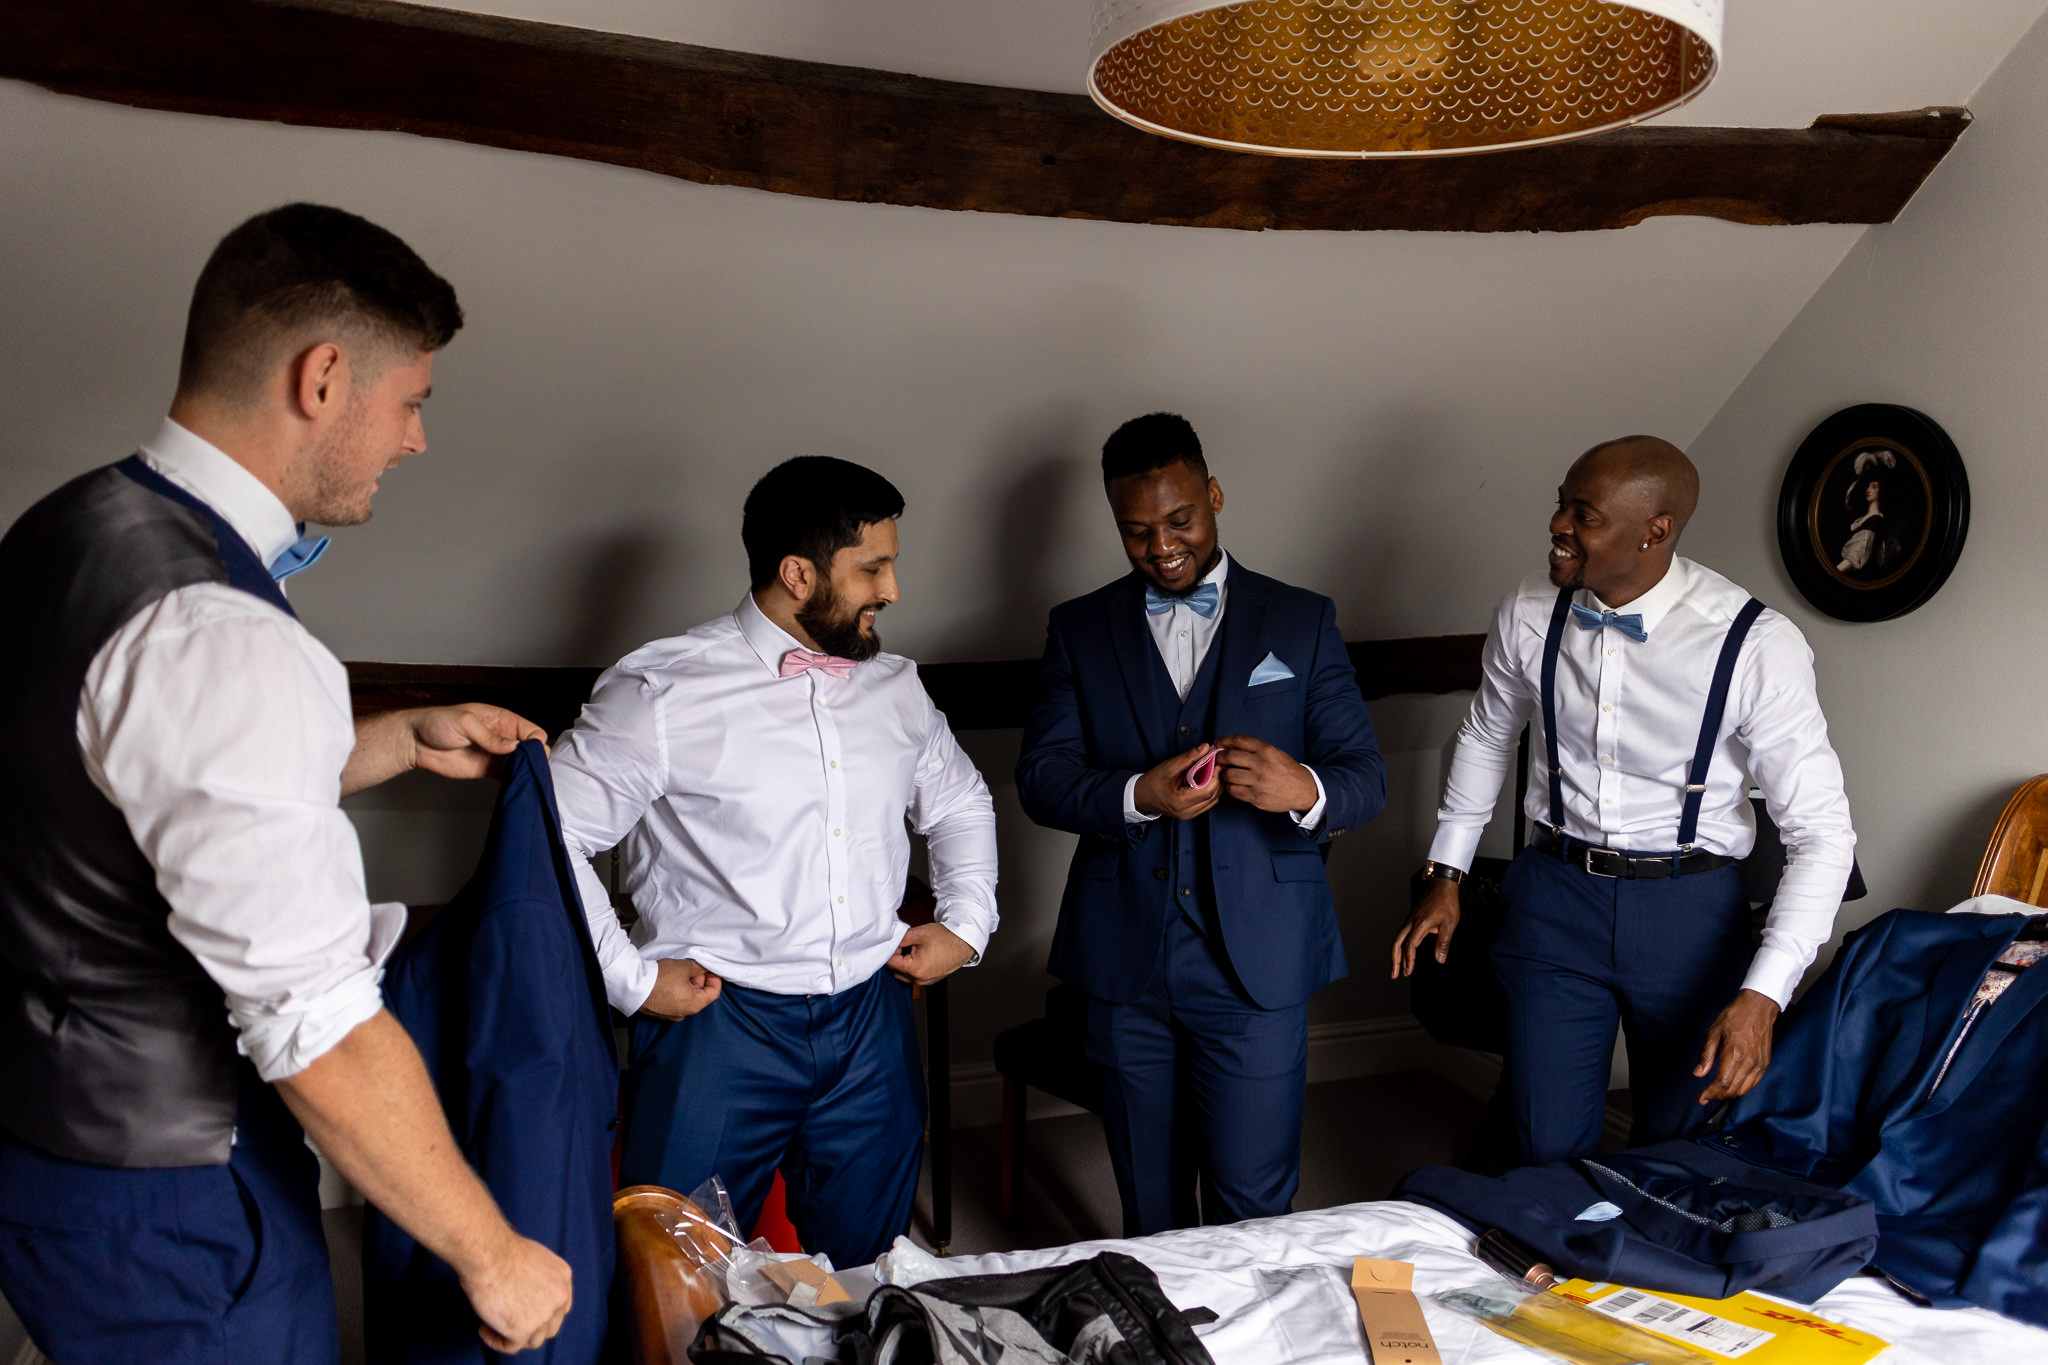 Groom and his groomsmen in the room getting ready